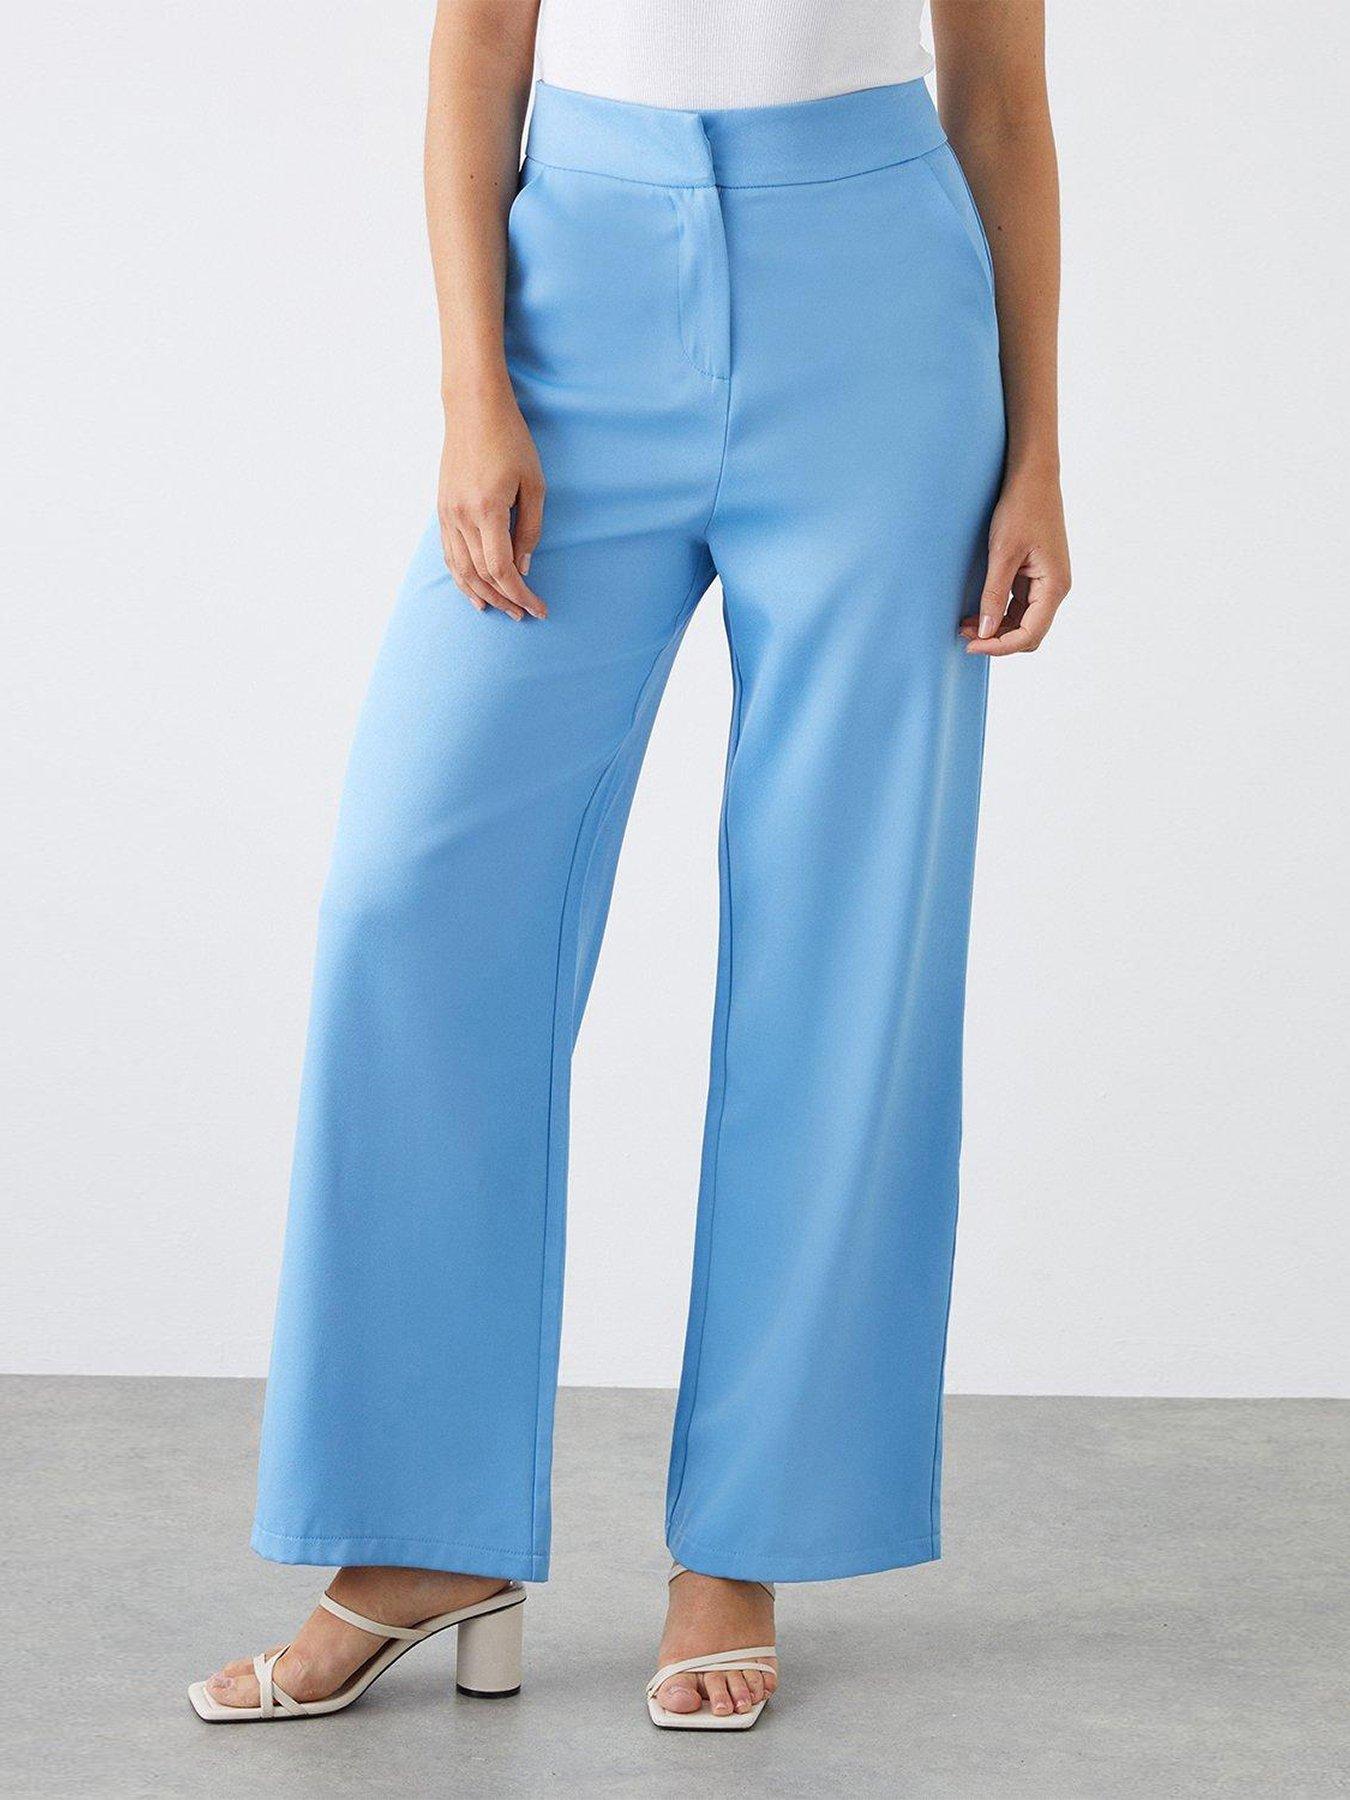 Boohoo Tailored Ankle Grazer Trousers - Coral